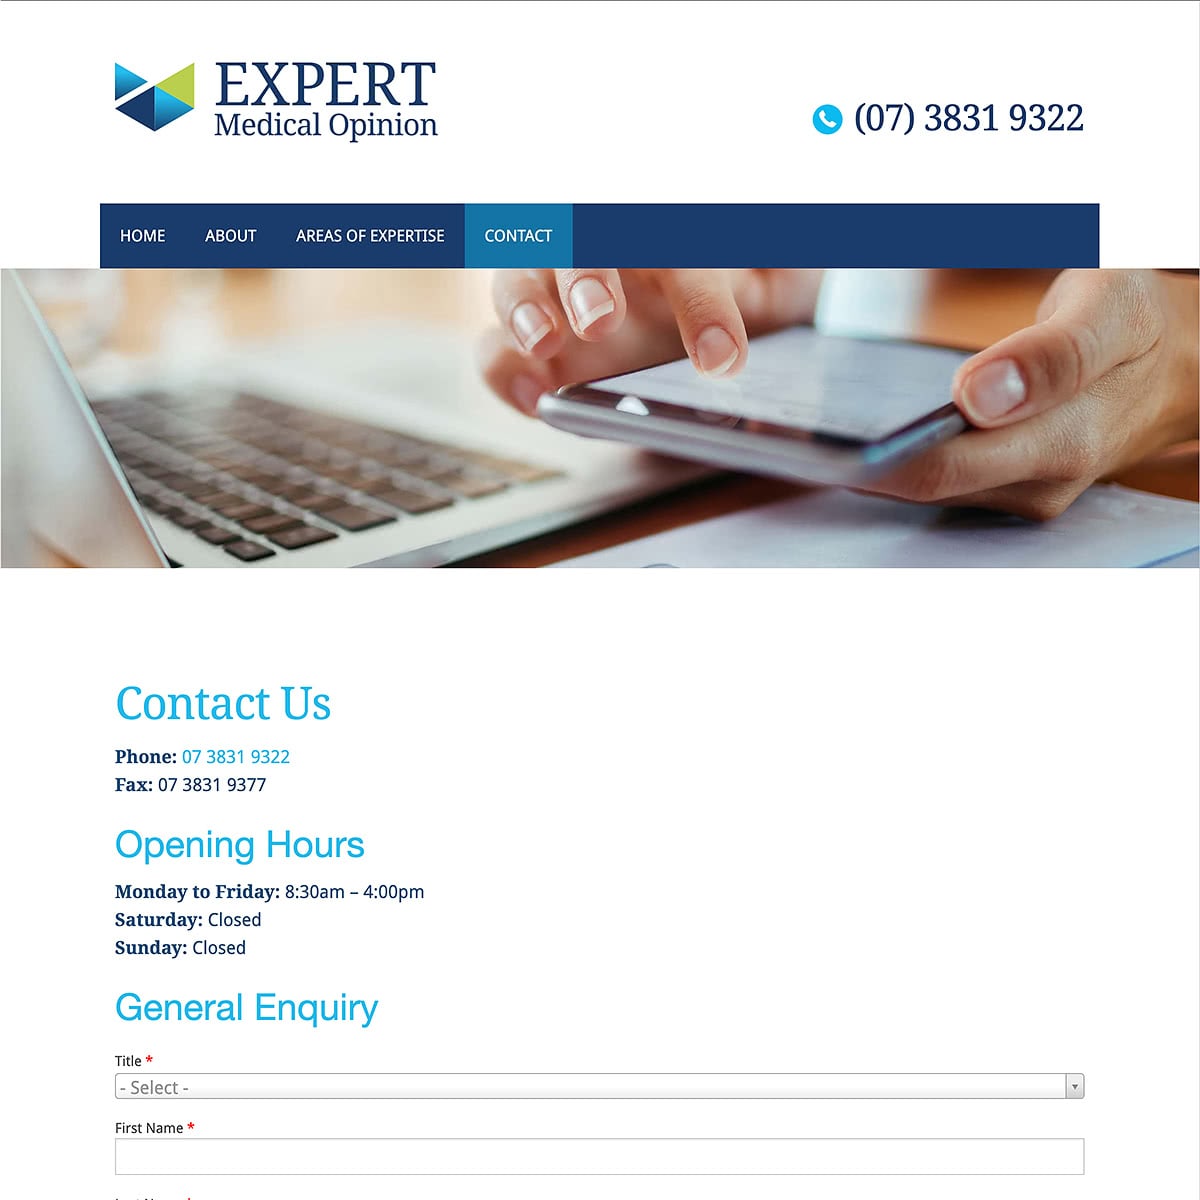 Expert Medical Opinion - Contact Us